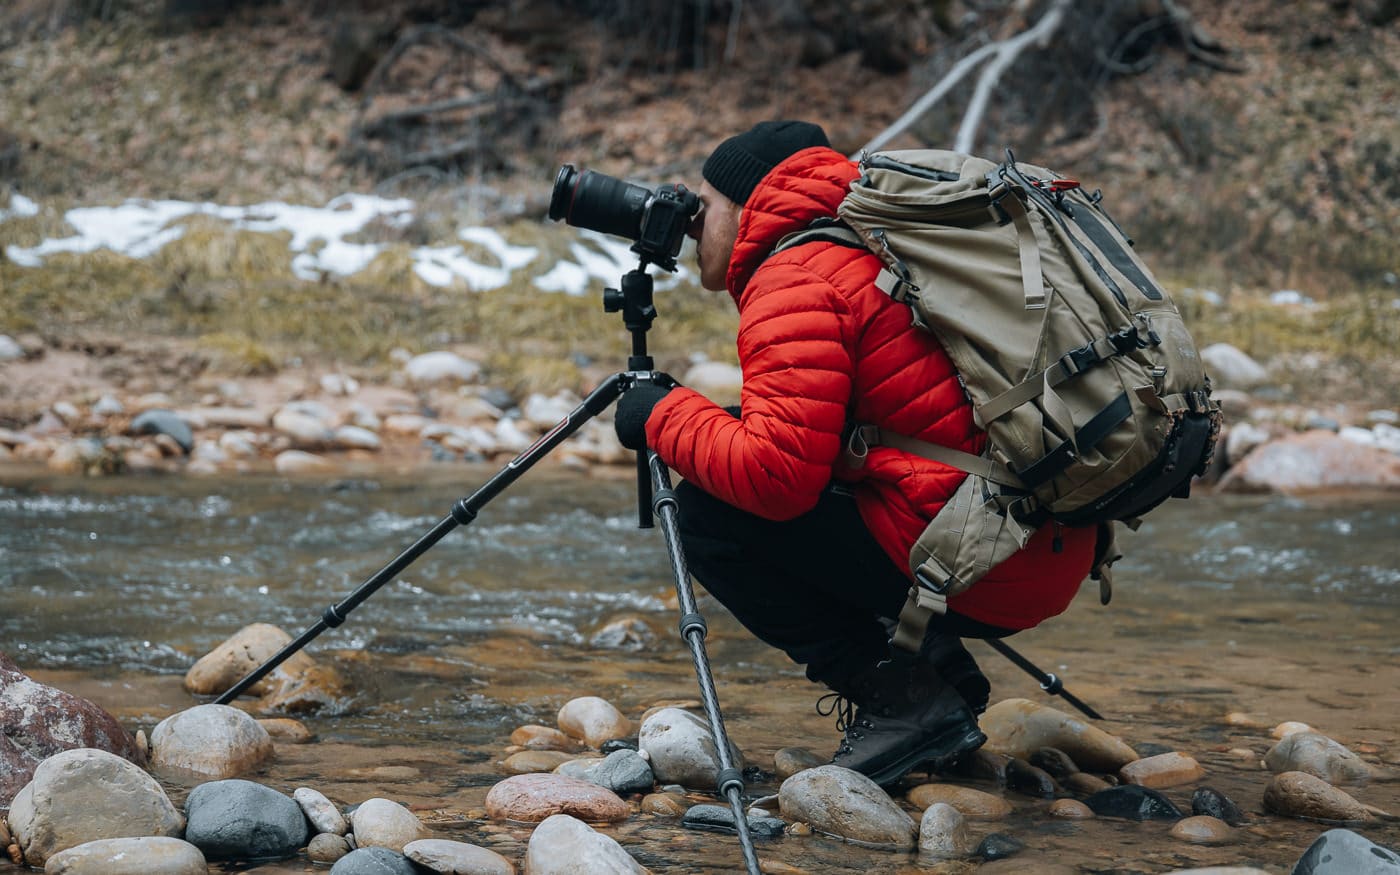 Lightweight tripod backpacking photography